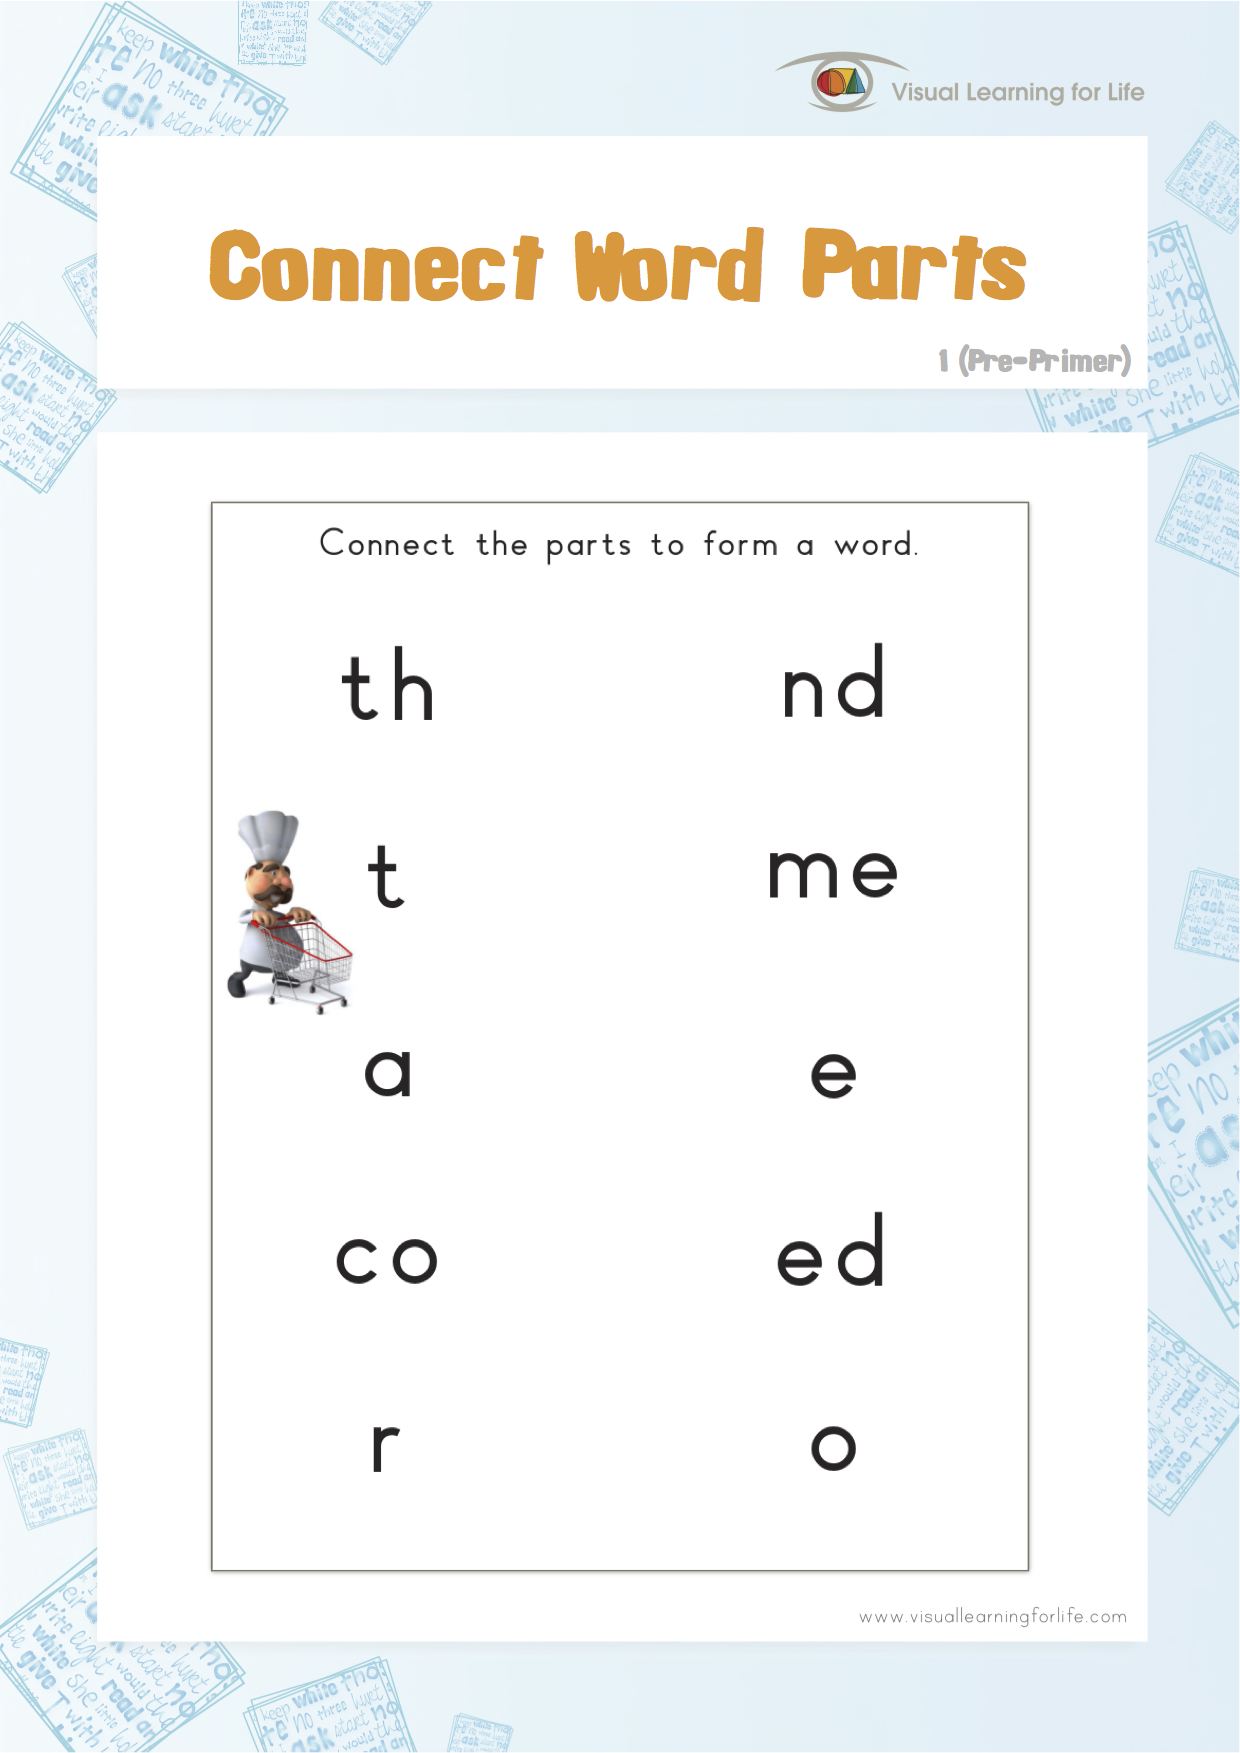 Connect Word Parts 1